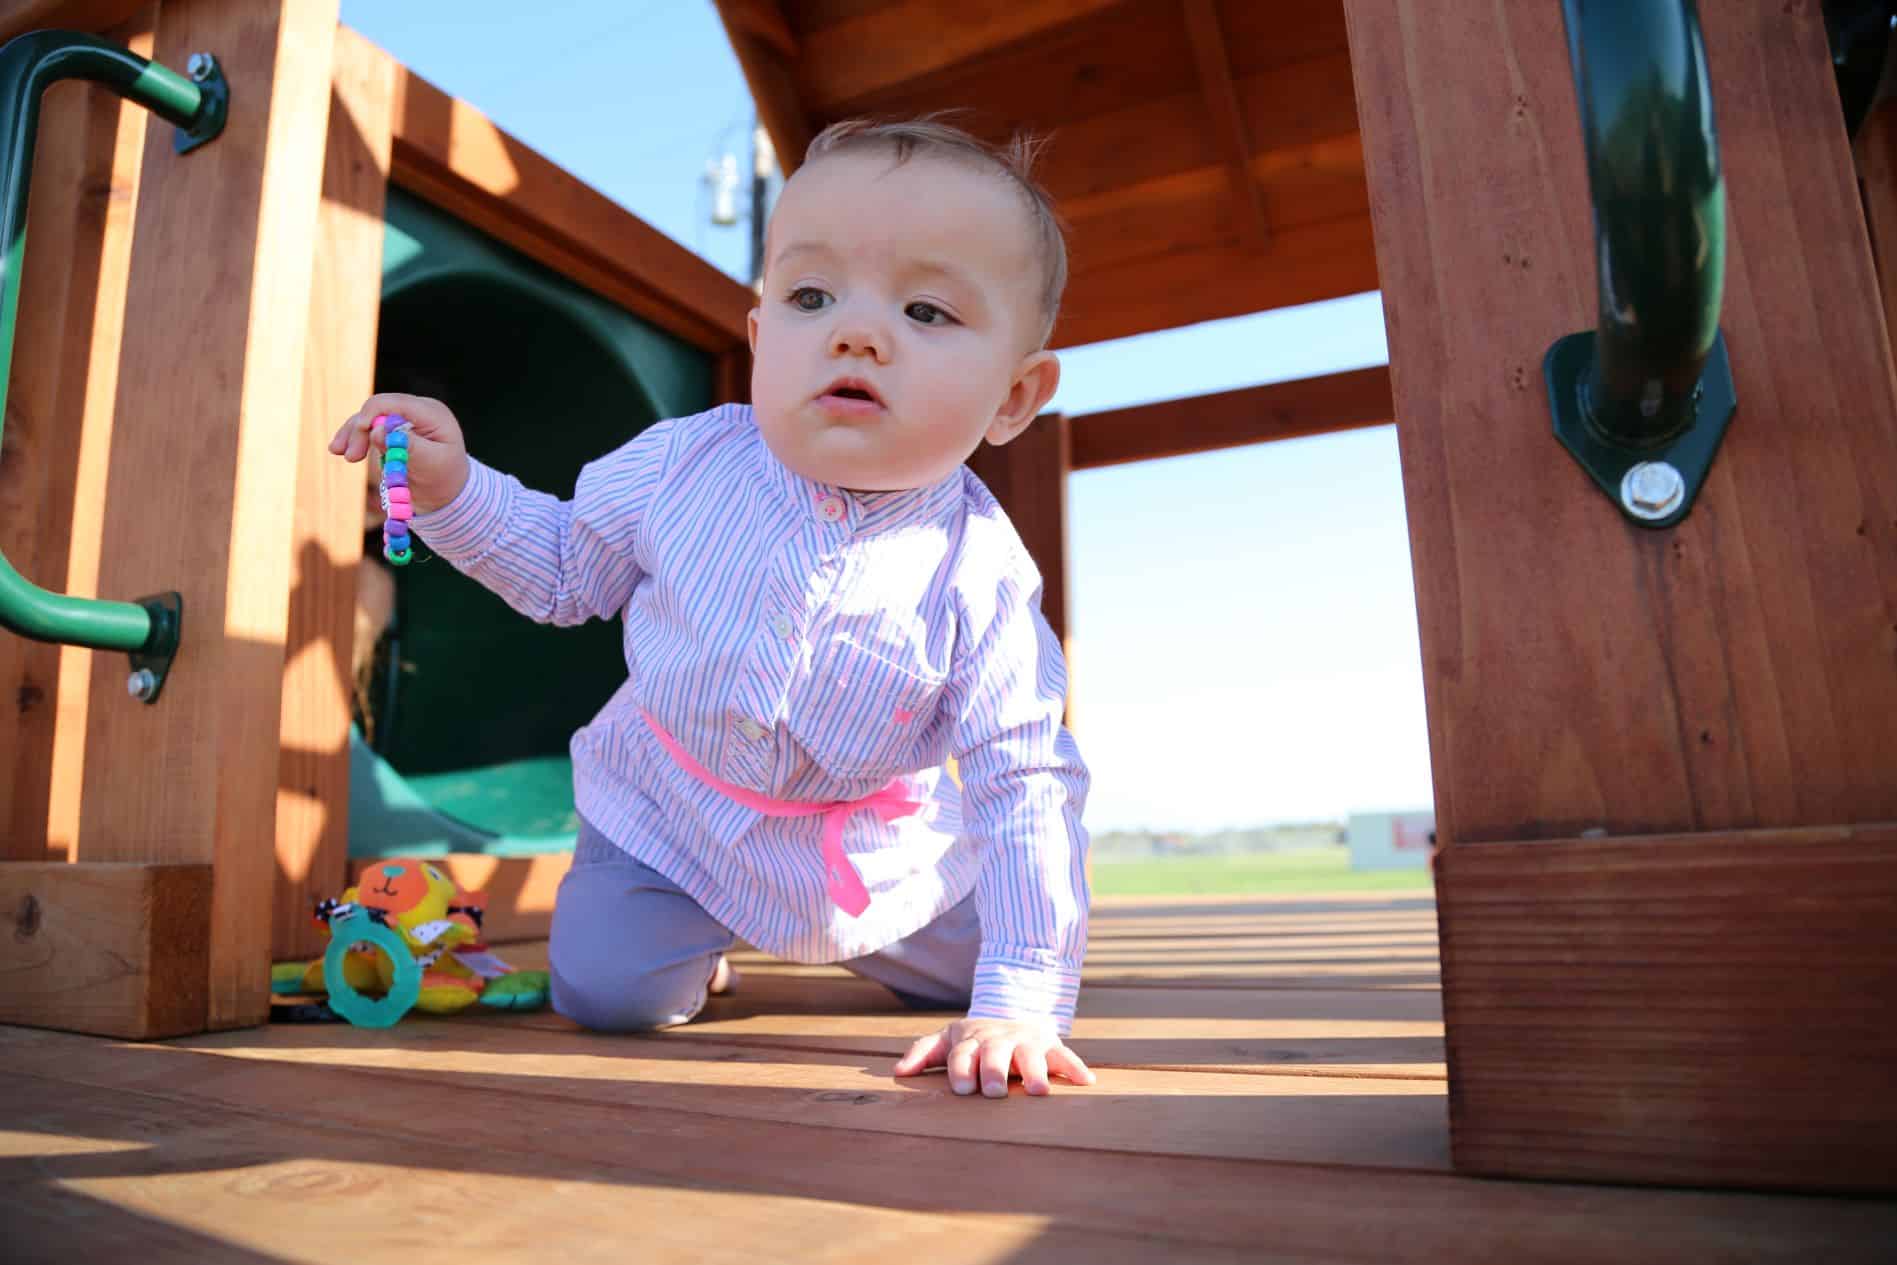 Hudson Oaks, Texas baby on redwood playset with slide behind her and grab handles in front of her